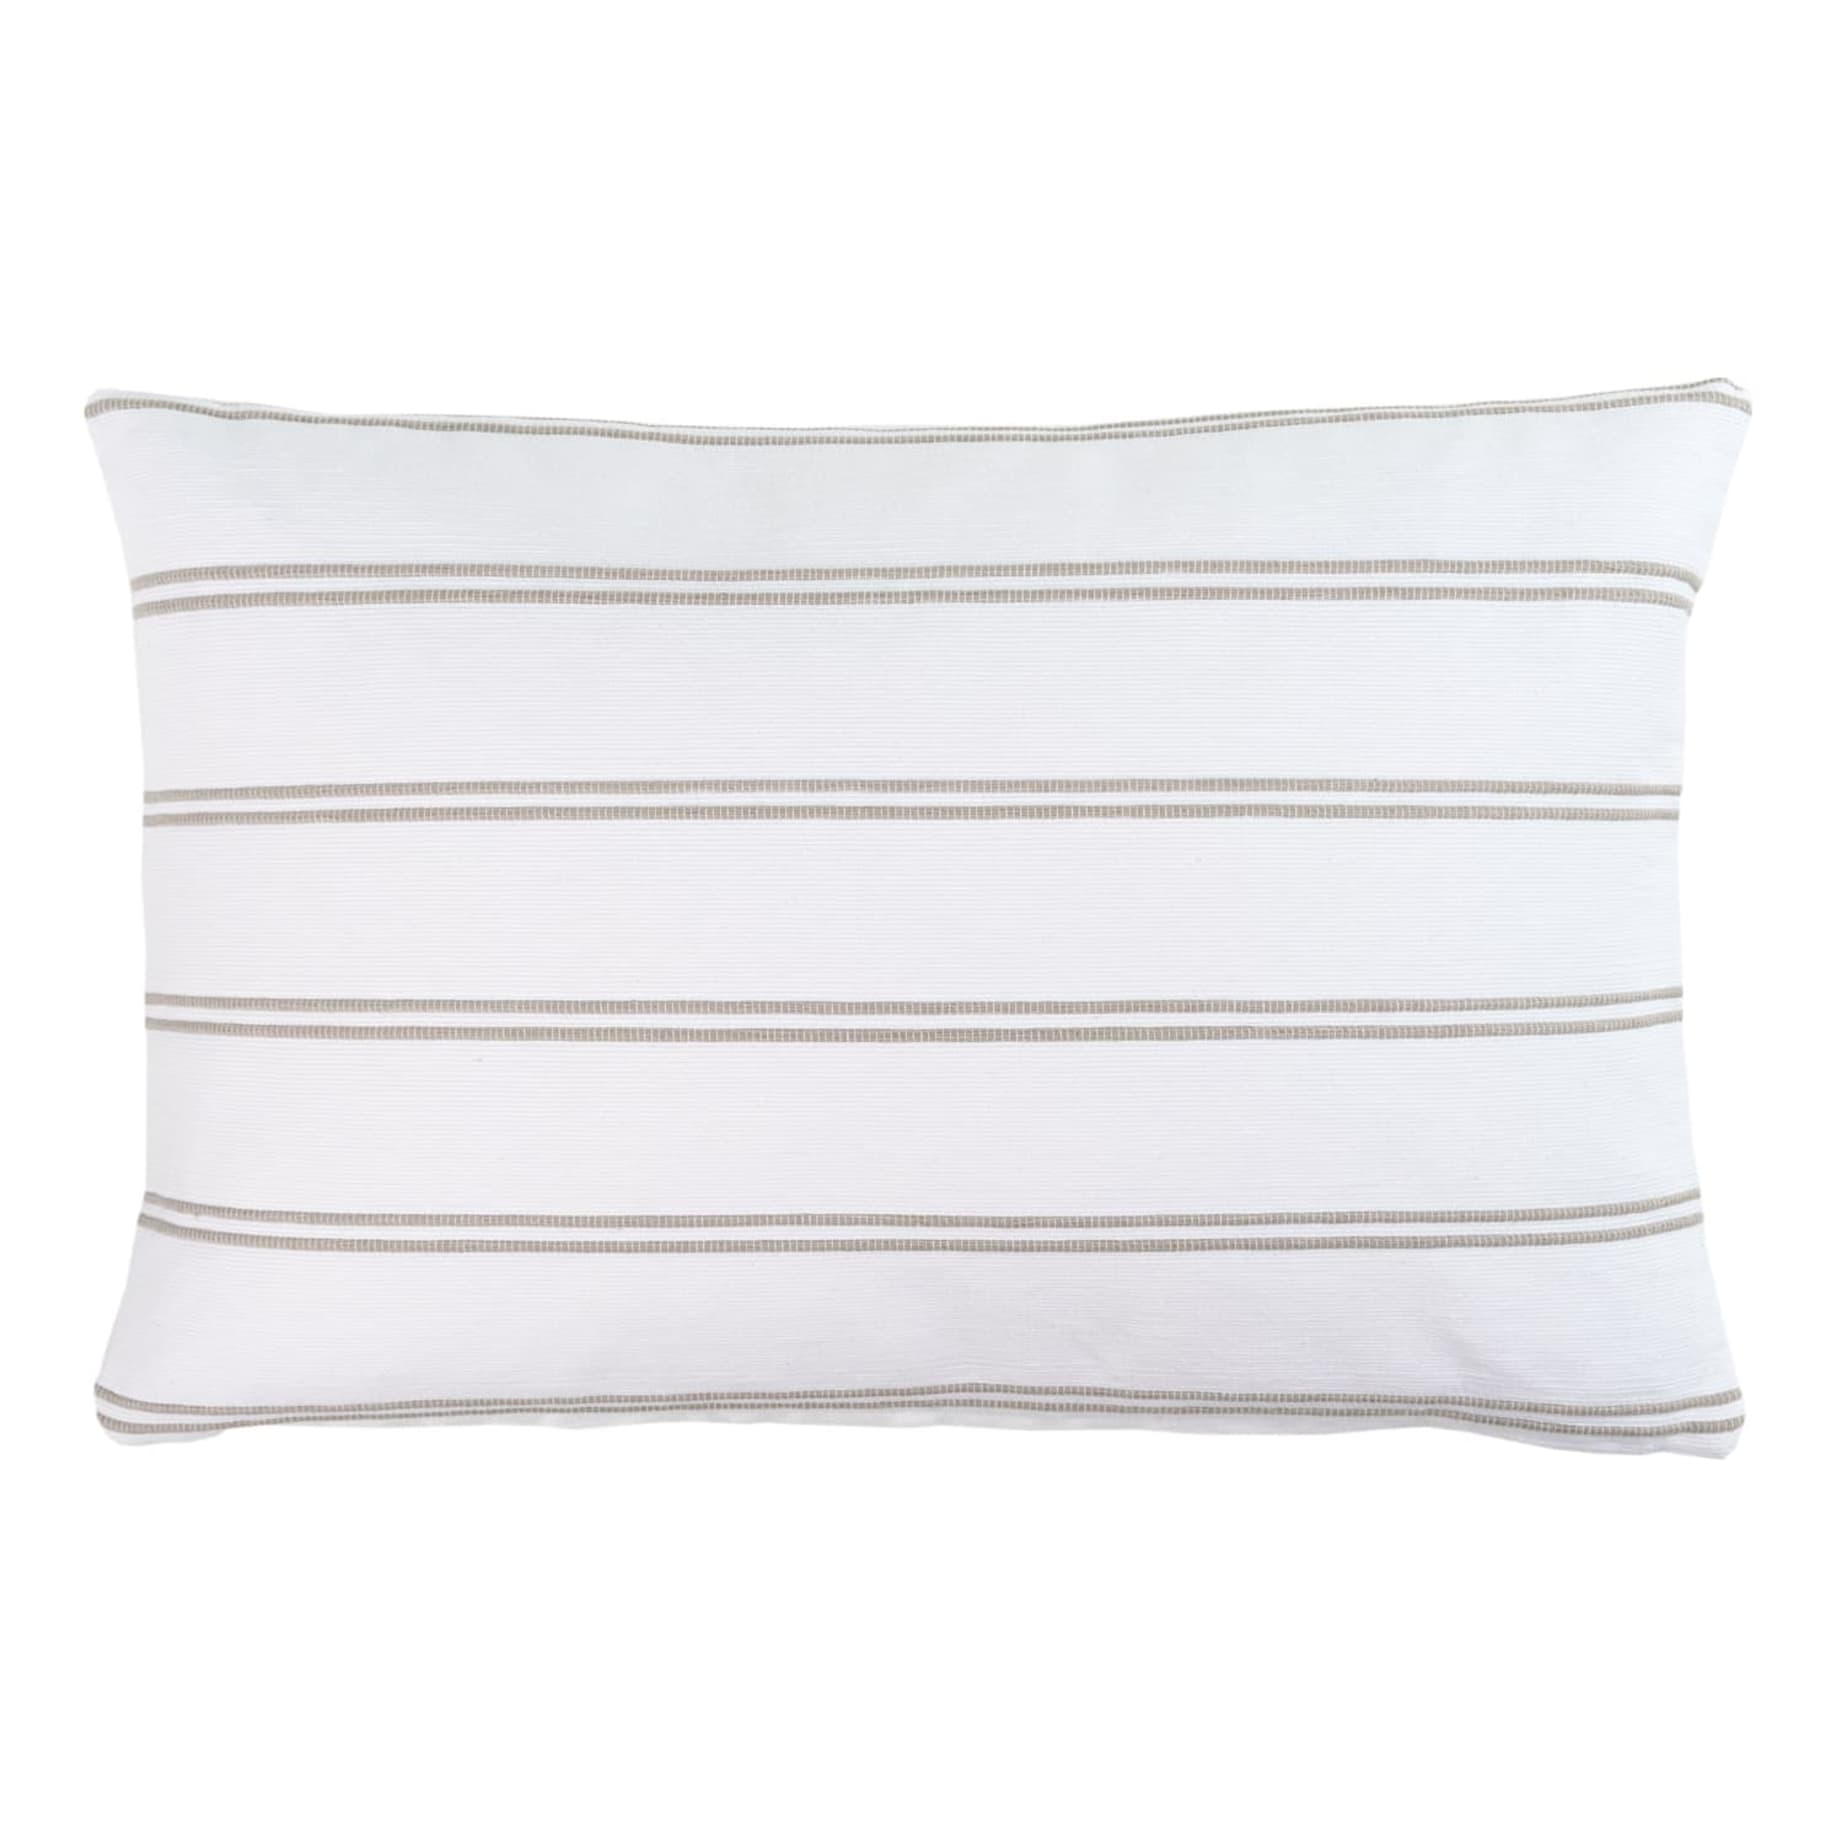 Montreal Feather Fill Cushion 60x40cm in Milk